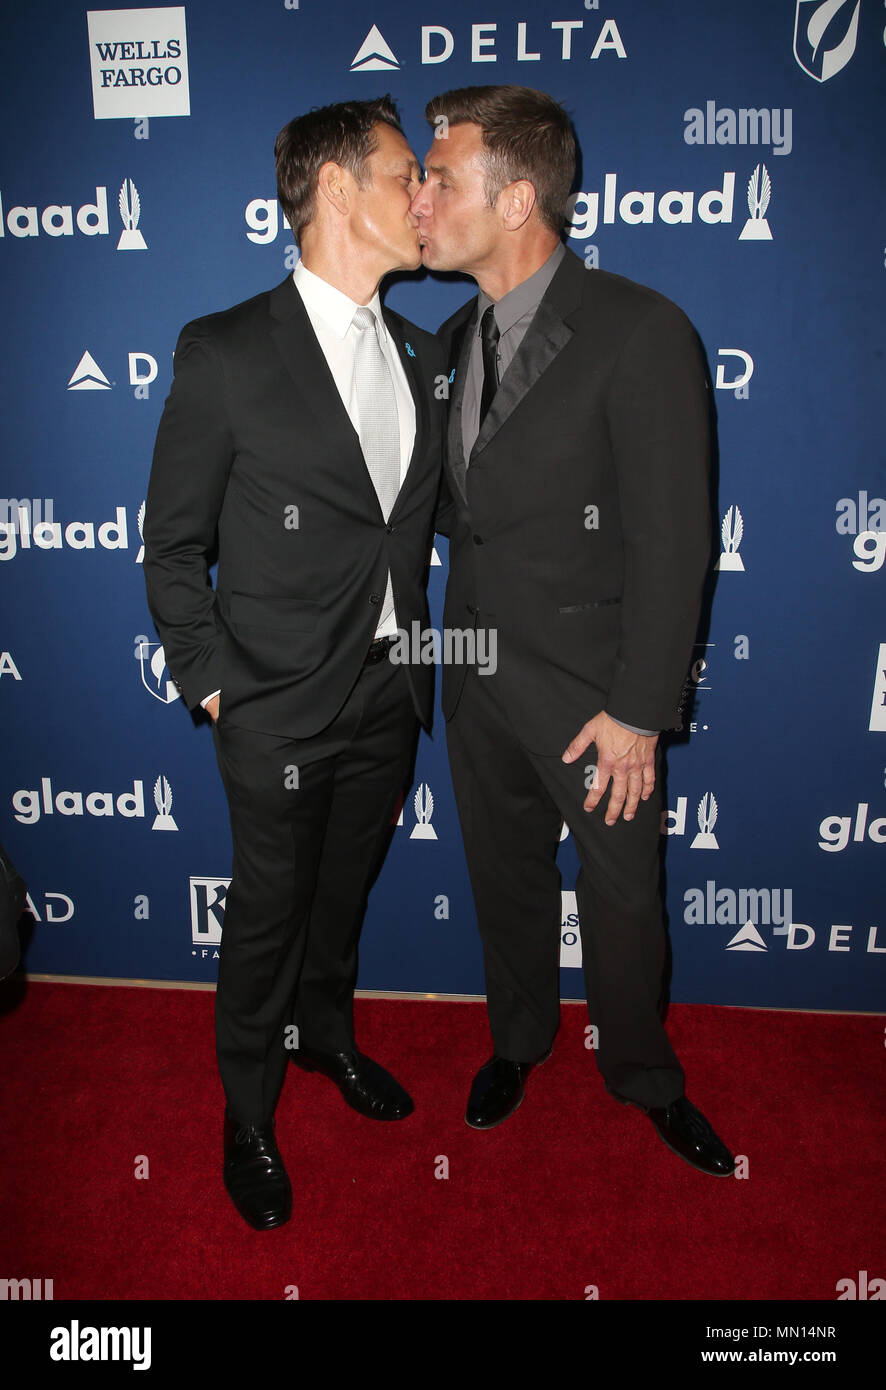 29th Annual GLAAD Media Awards Los Angeles Featuring: Robert Gant, Guest  Where: Beverly Hills, California, United States When: 13 Apr 2018 Credit:  FayesVision/WENN.com Stock Photo - Alamy